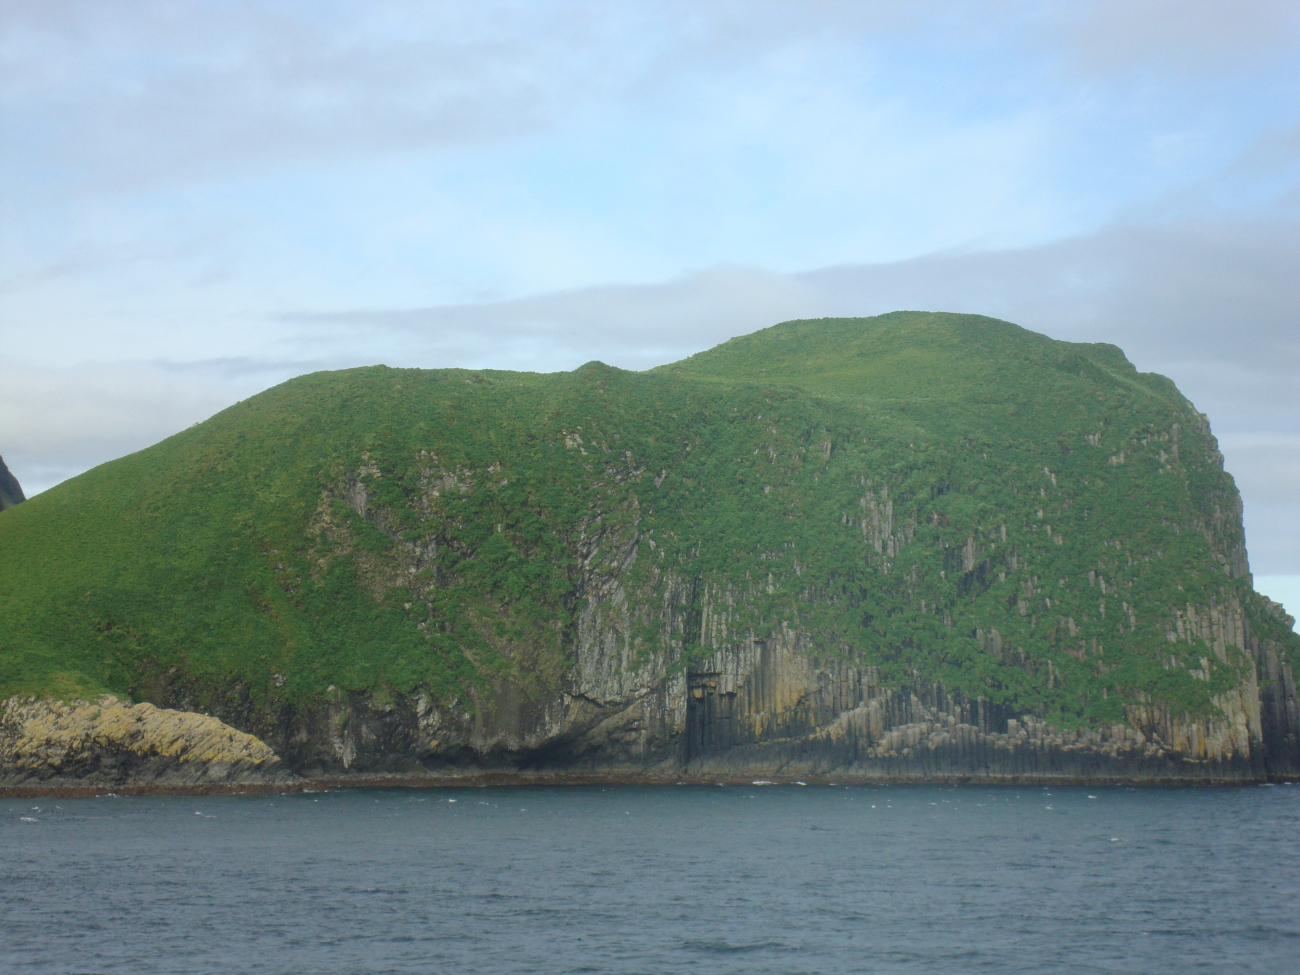 When this island formed, volcanic lava cooled into basalt hexagonal columns